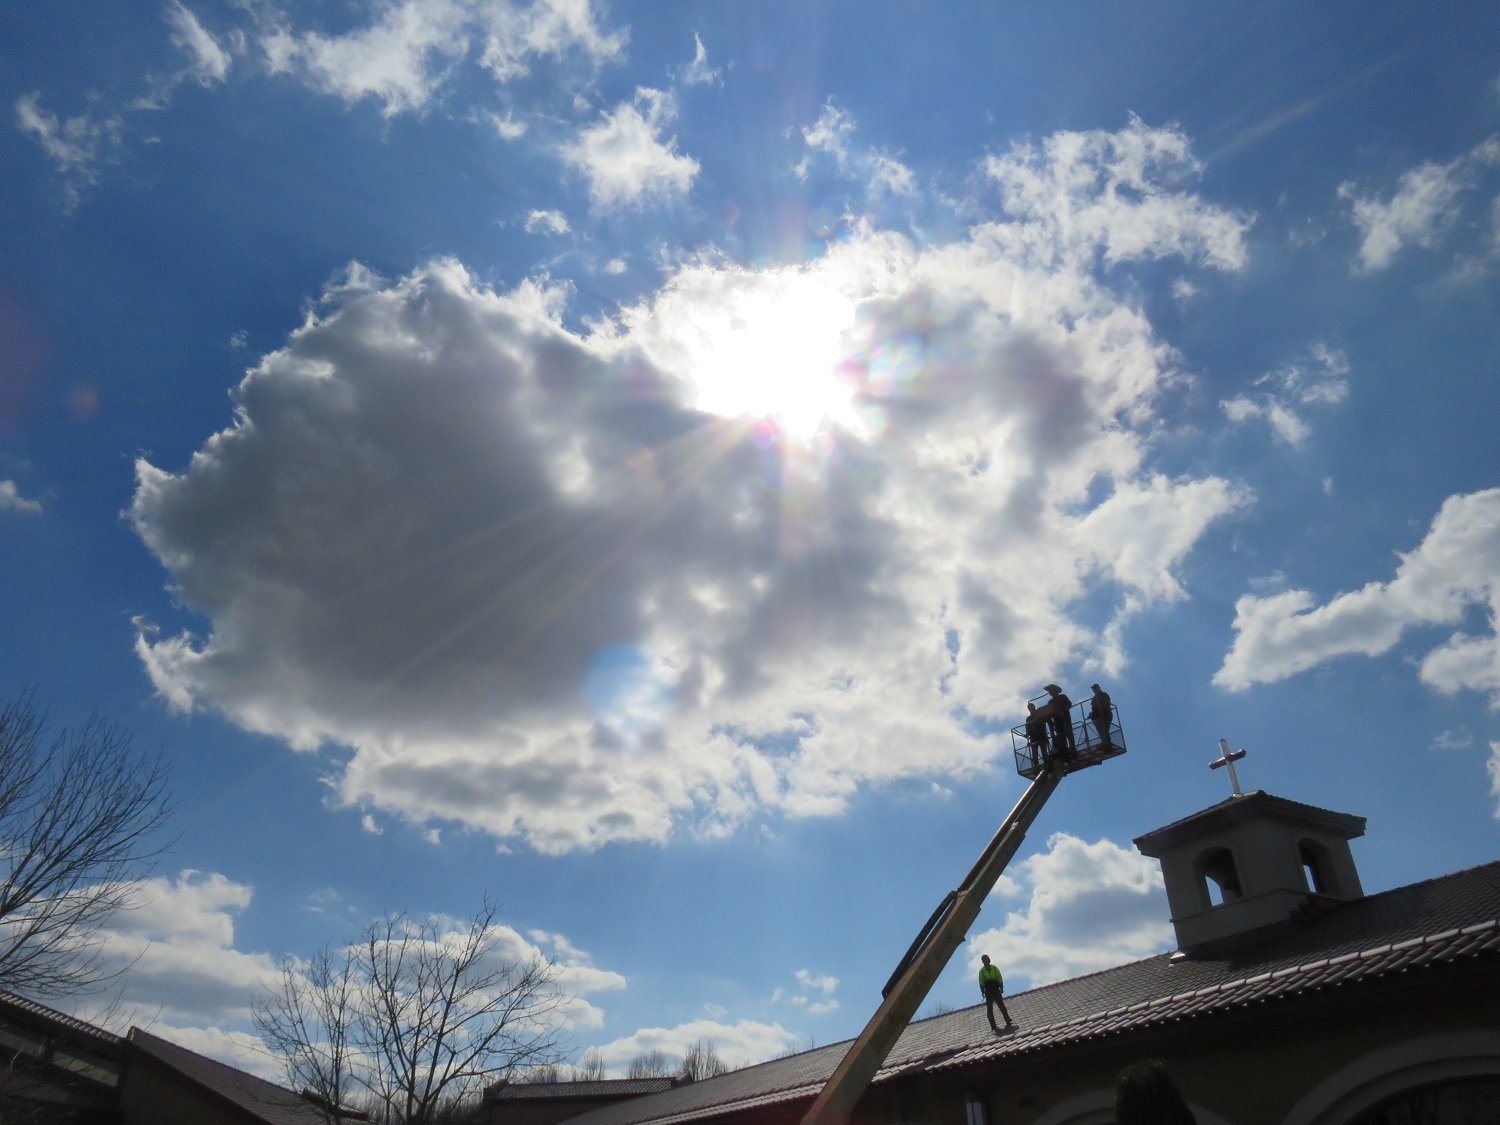 March 10 - A confirmation from Heaven ... as soon as the cross was blessed, the sun came out from behind a cloud!